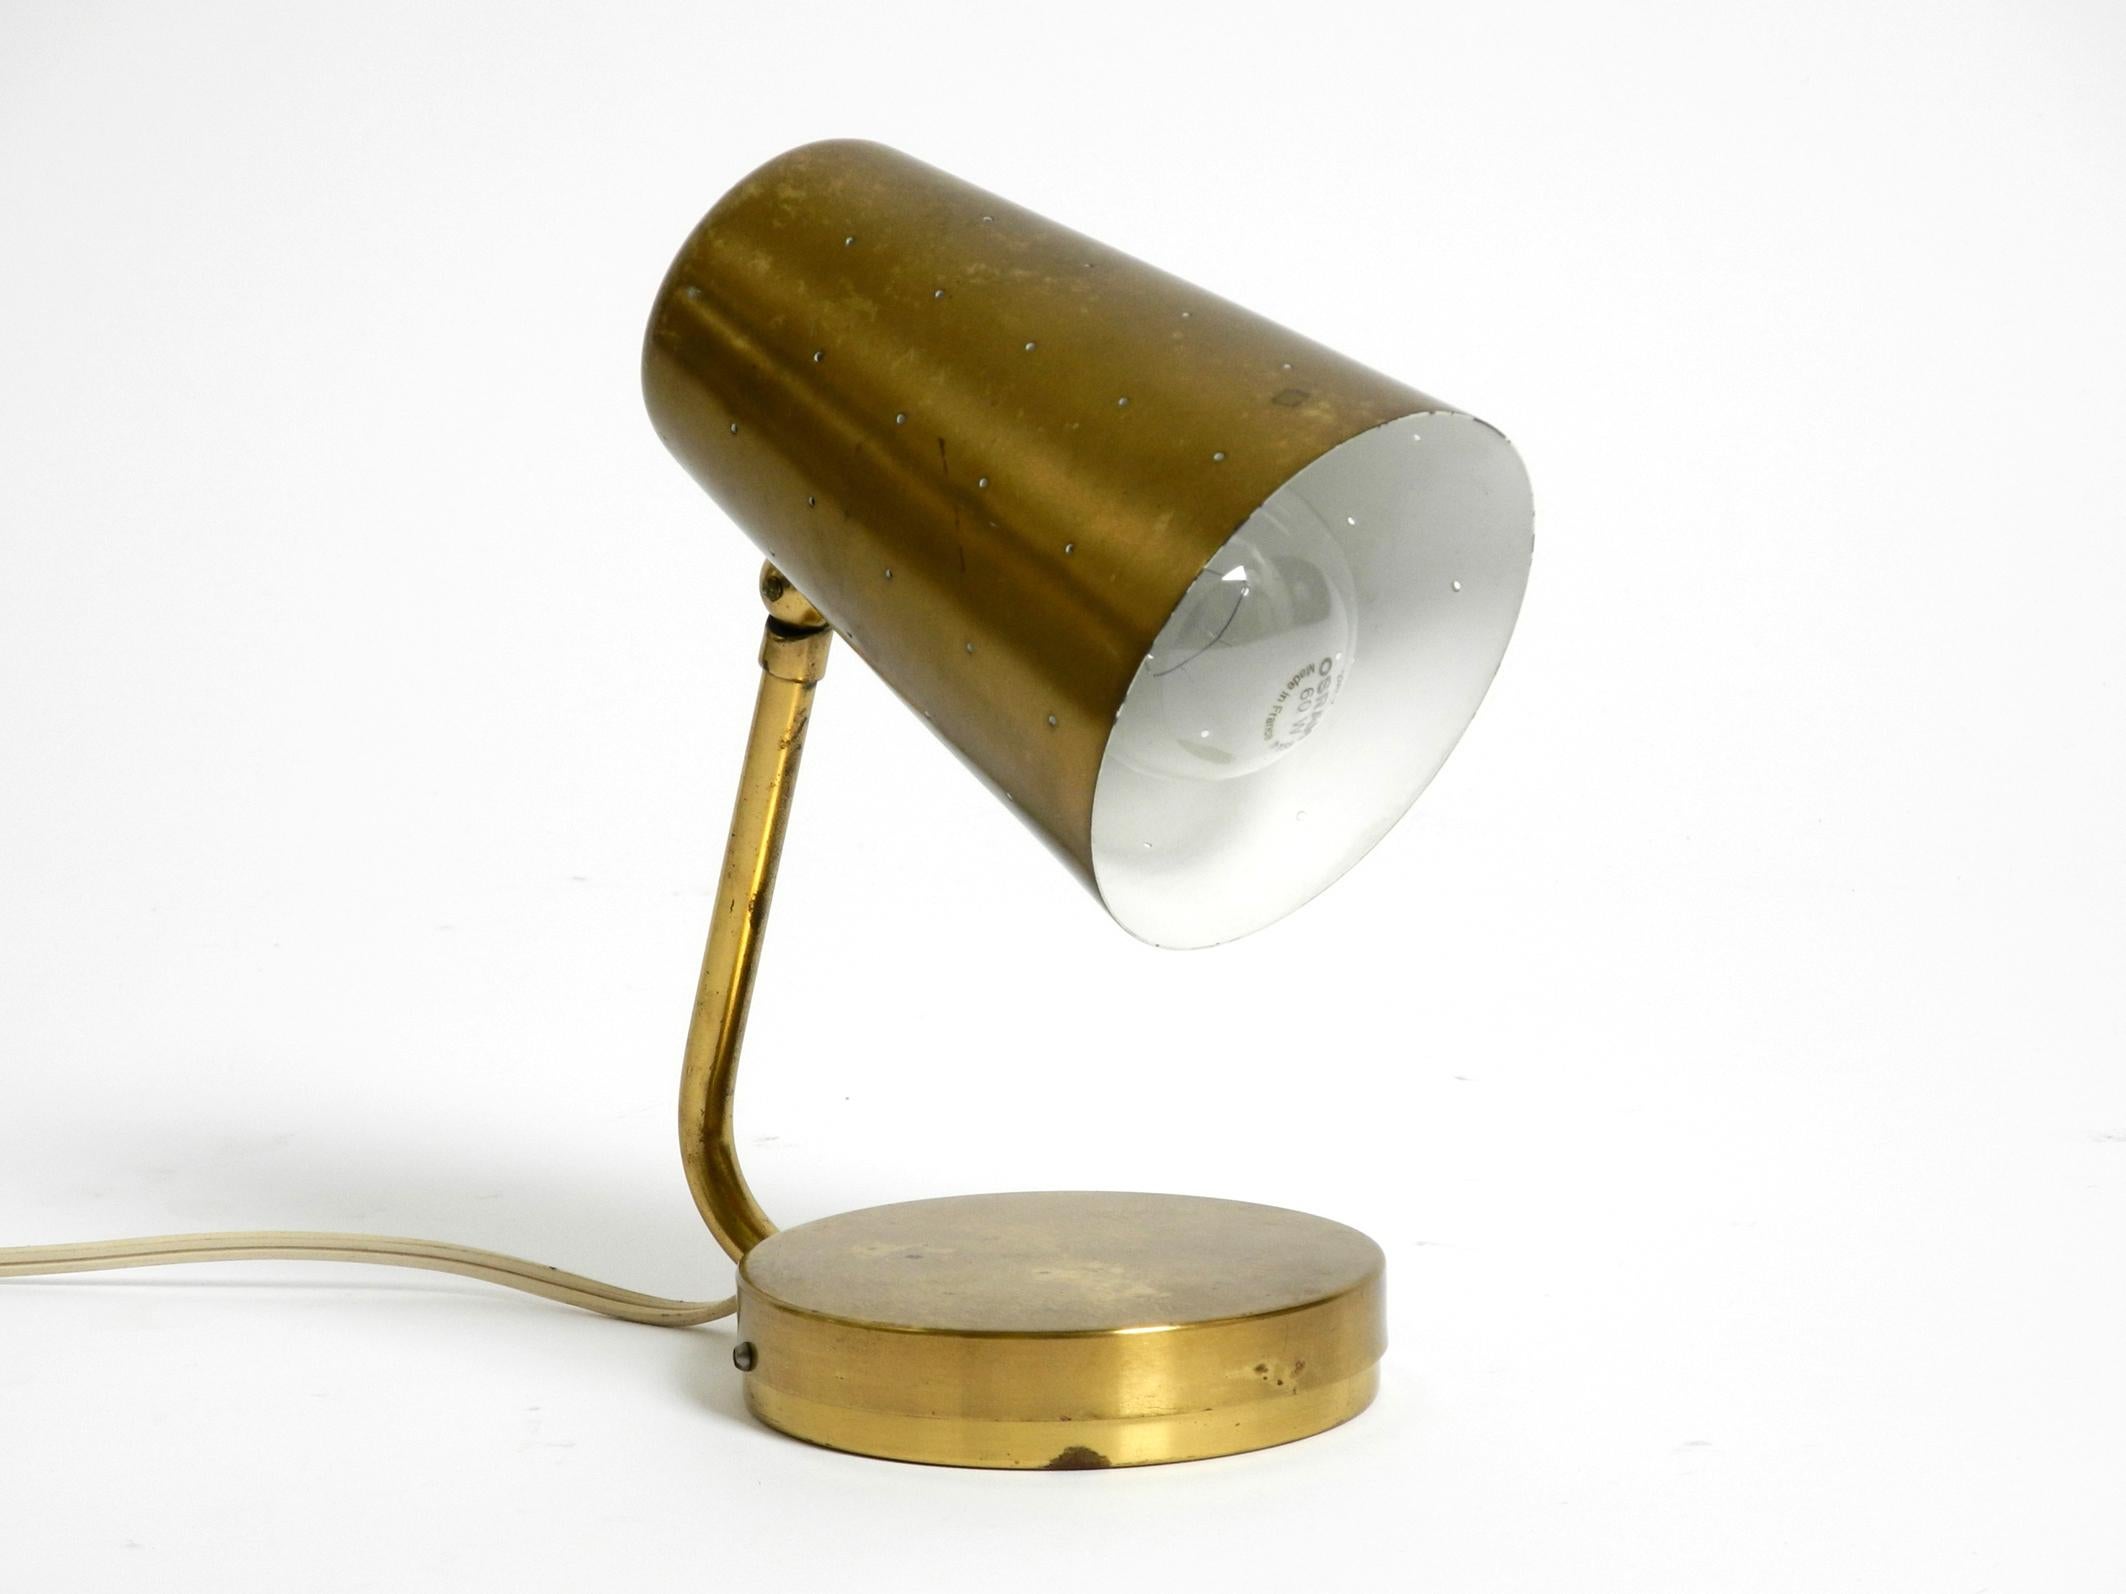 Beautiful large  Mid Century Modern brass table lamp.
The screen is infinitely adjustable. Very elegant 1950s design.
The lampshade has small holes, with the light shining through it looks great.
In very good vintage condition. No damage, no dents